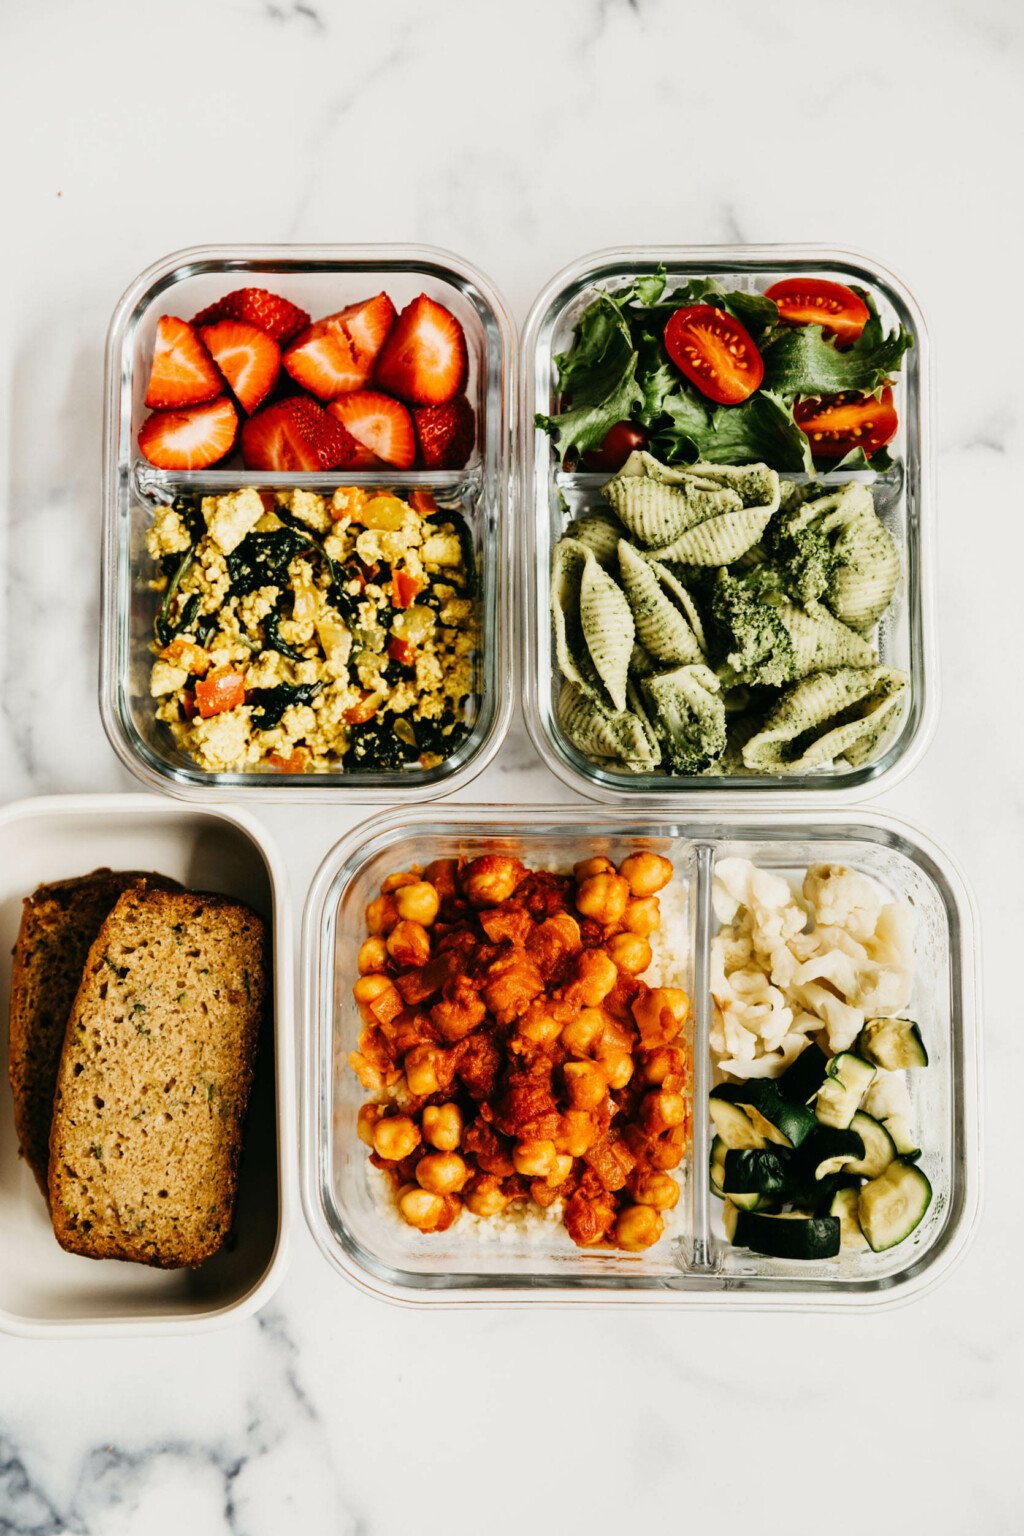 An overhead image of components of vegan meal prep, which have been packed in divided containers.